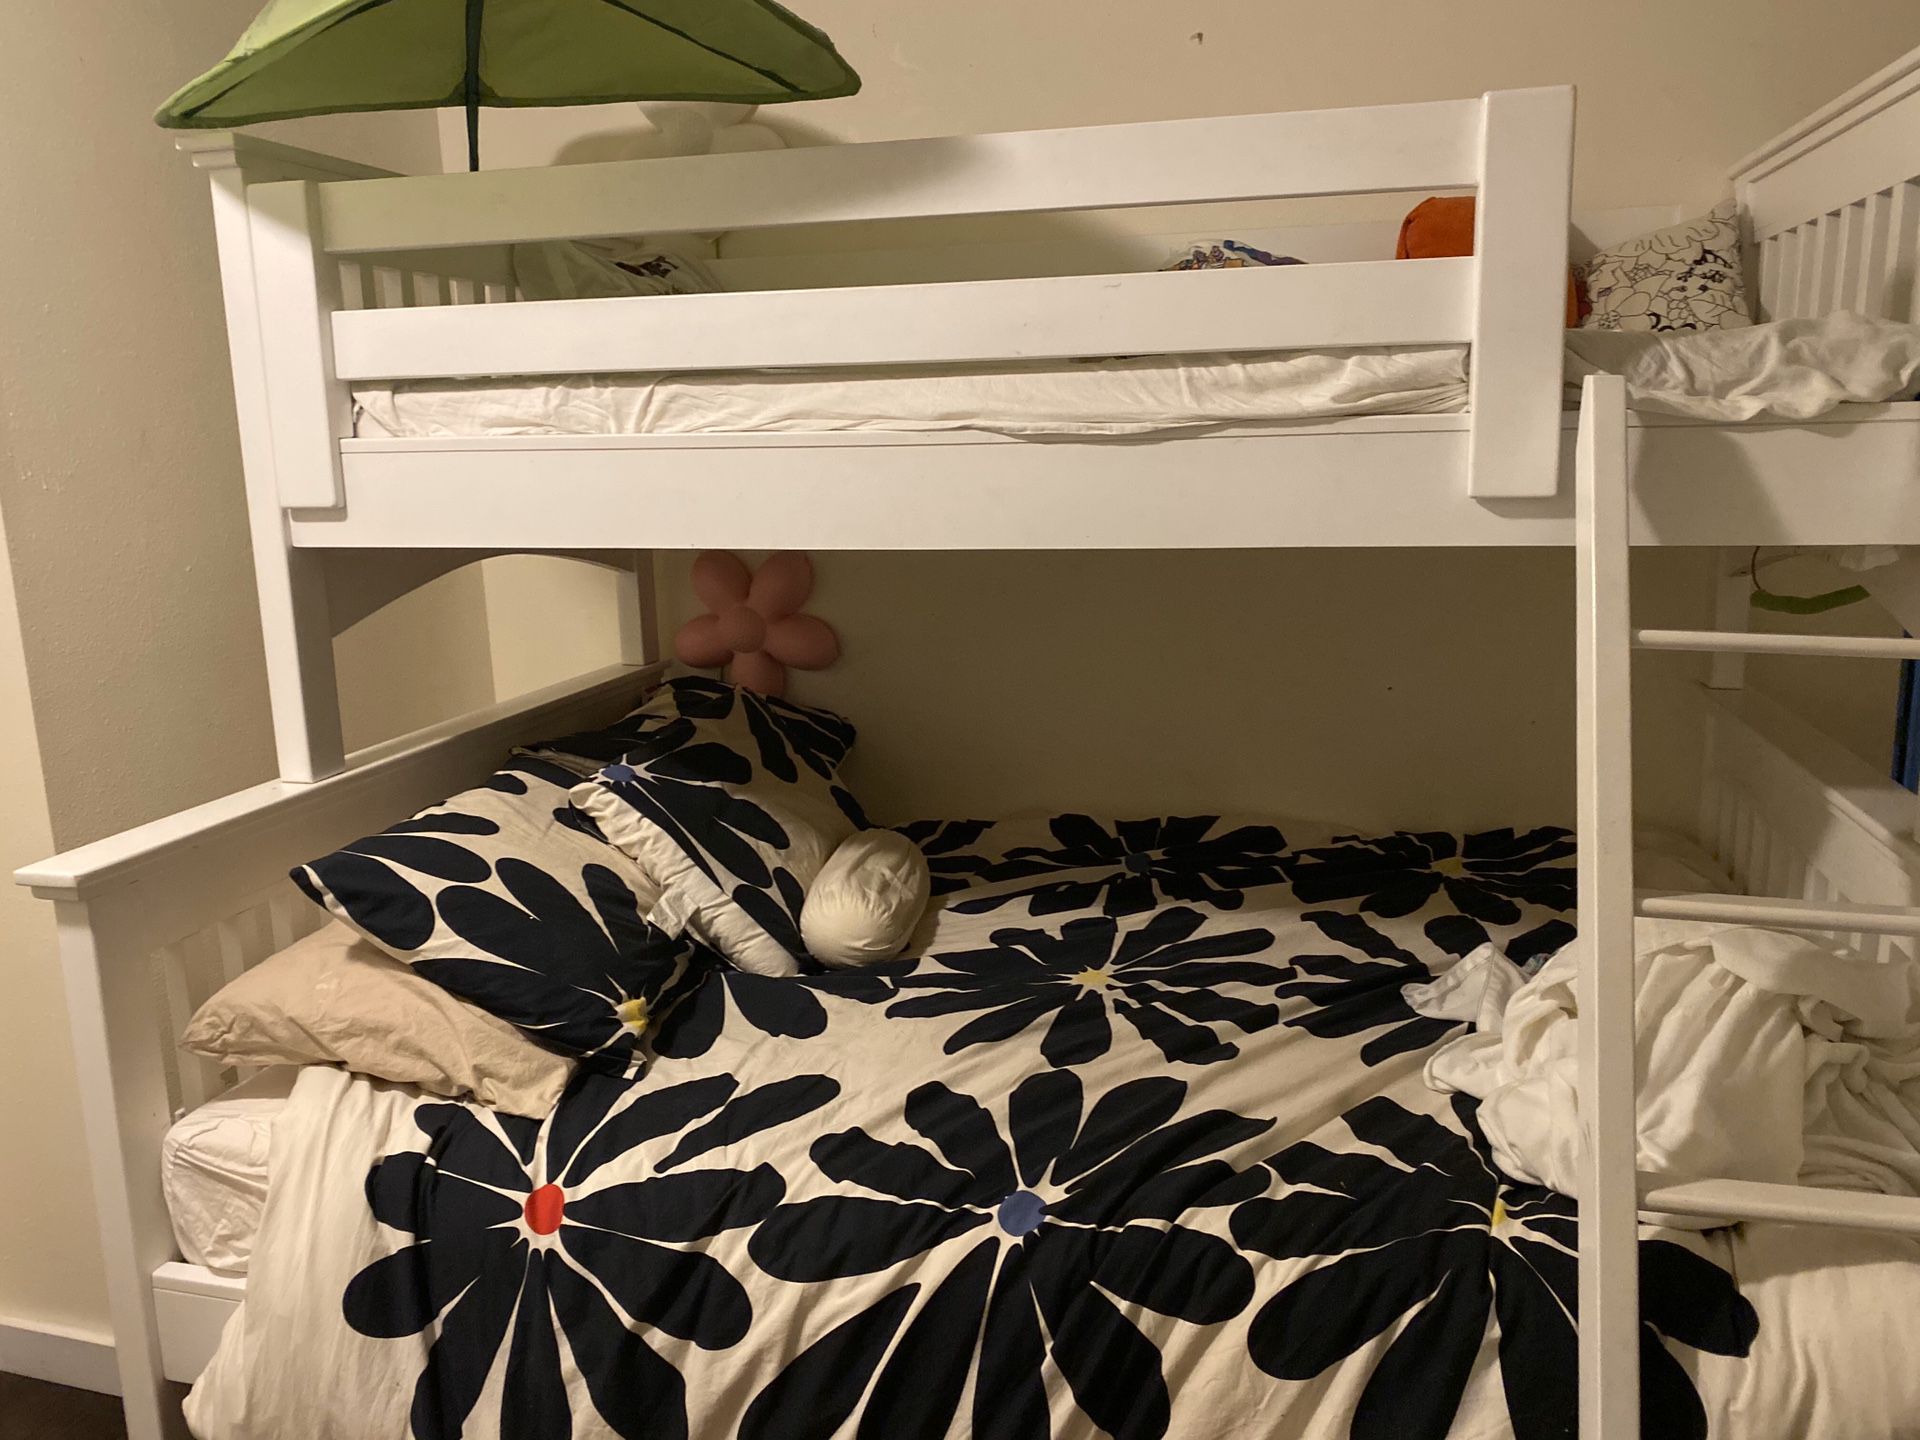 Bunk bed in almost perfect condition